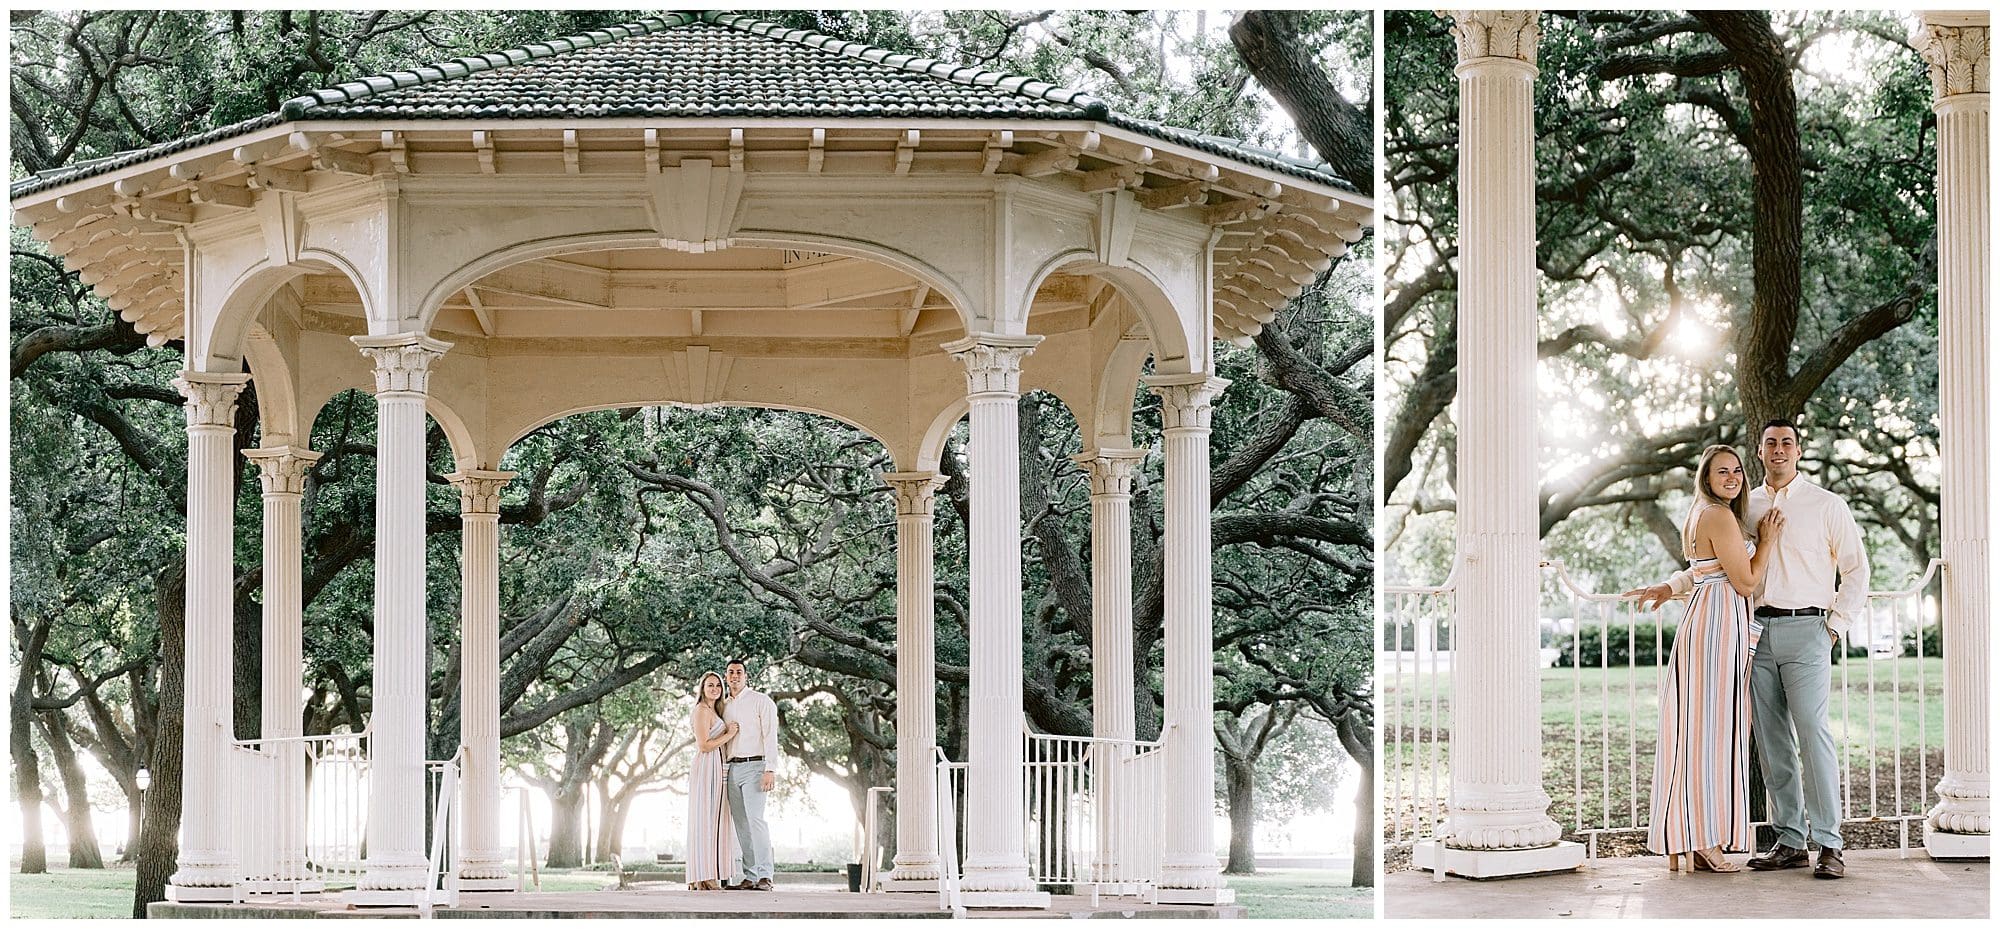 A summer engagement session in Charleston, SC in a gazebo taken by Kathy Beaver Photography, a Charleston engagament photographer.